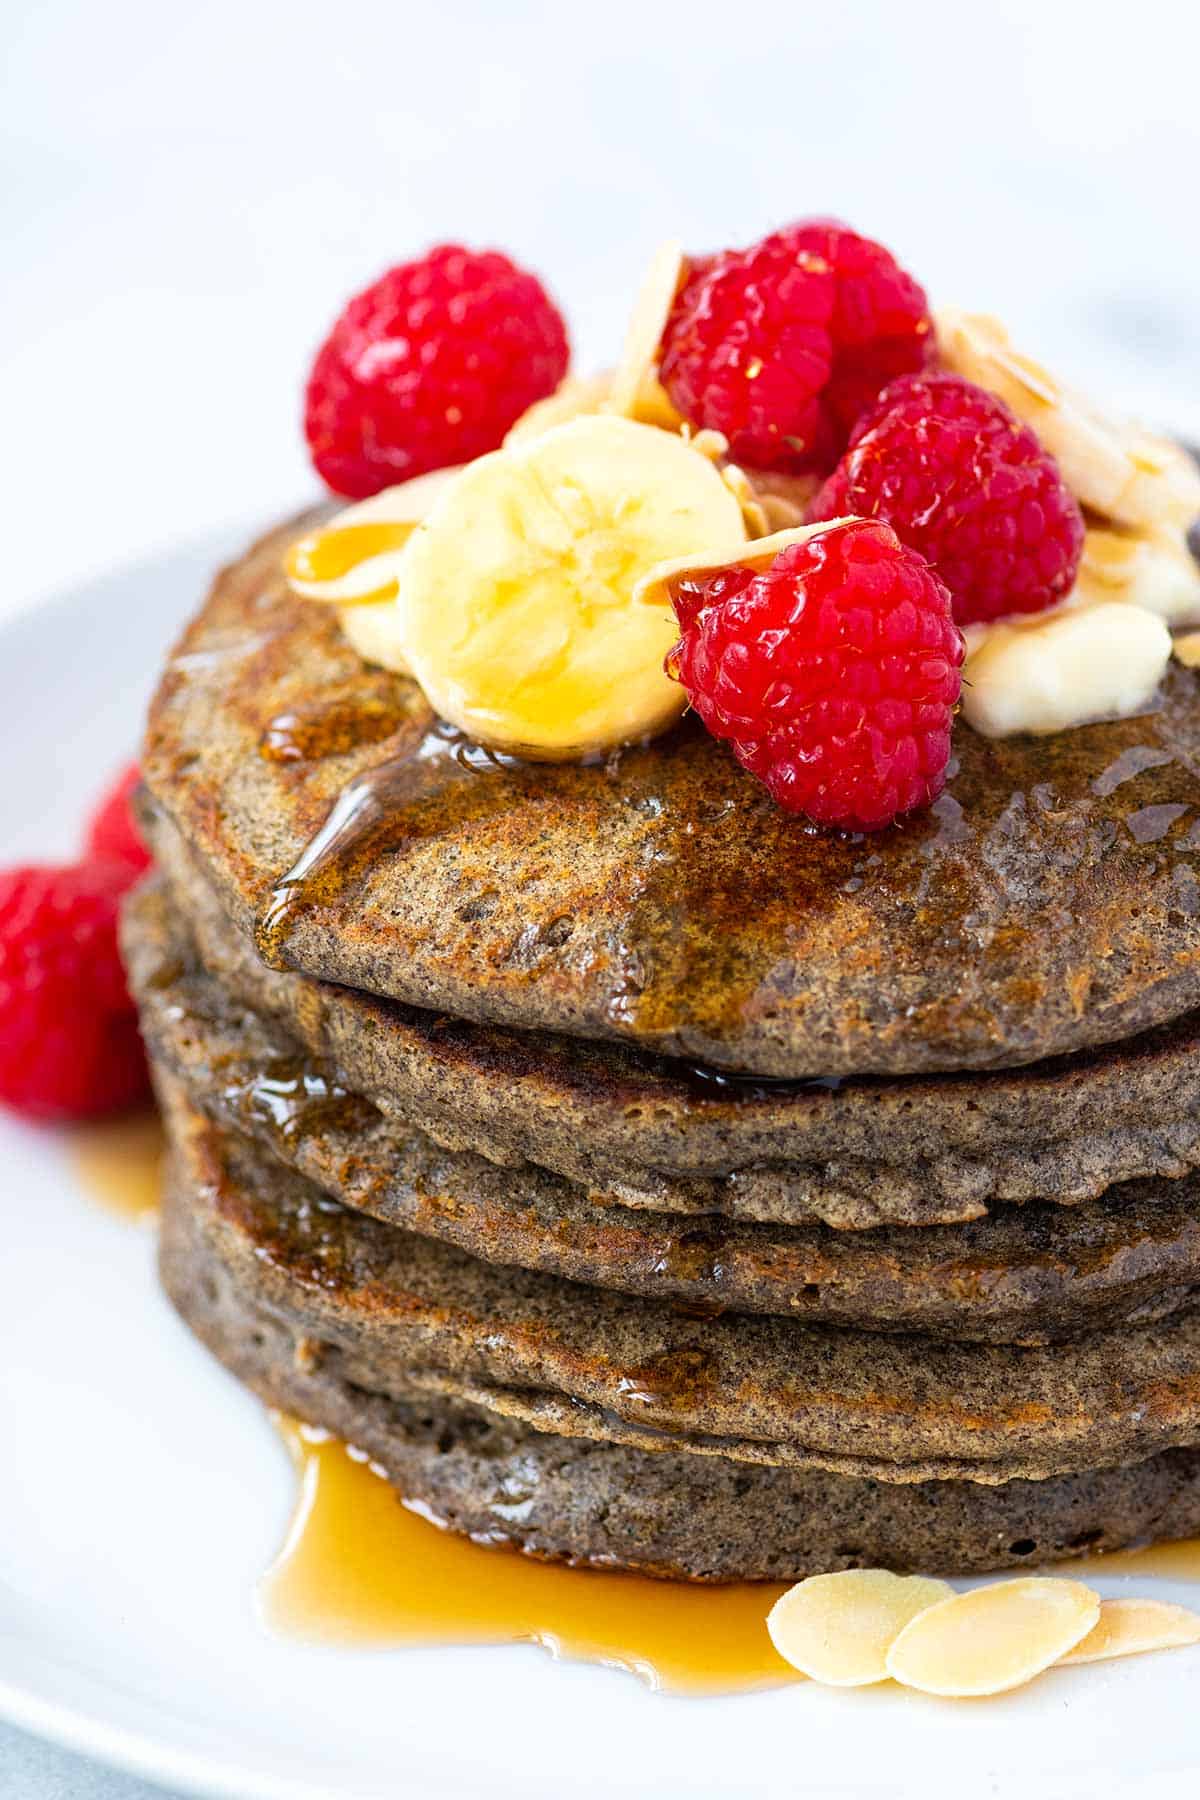 Buckwheat Pancakes with berries and sliced bananas